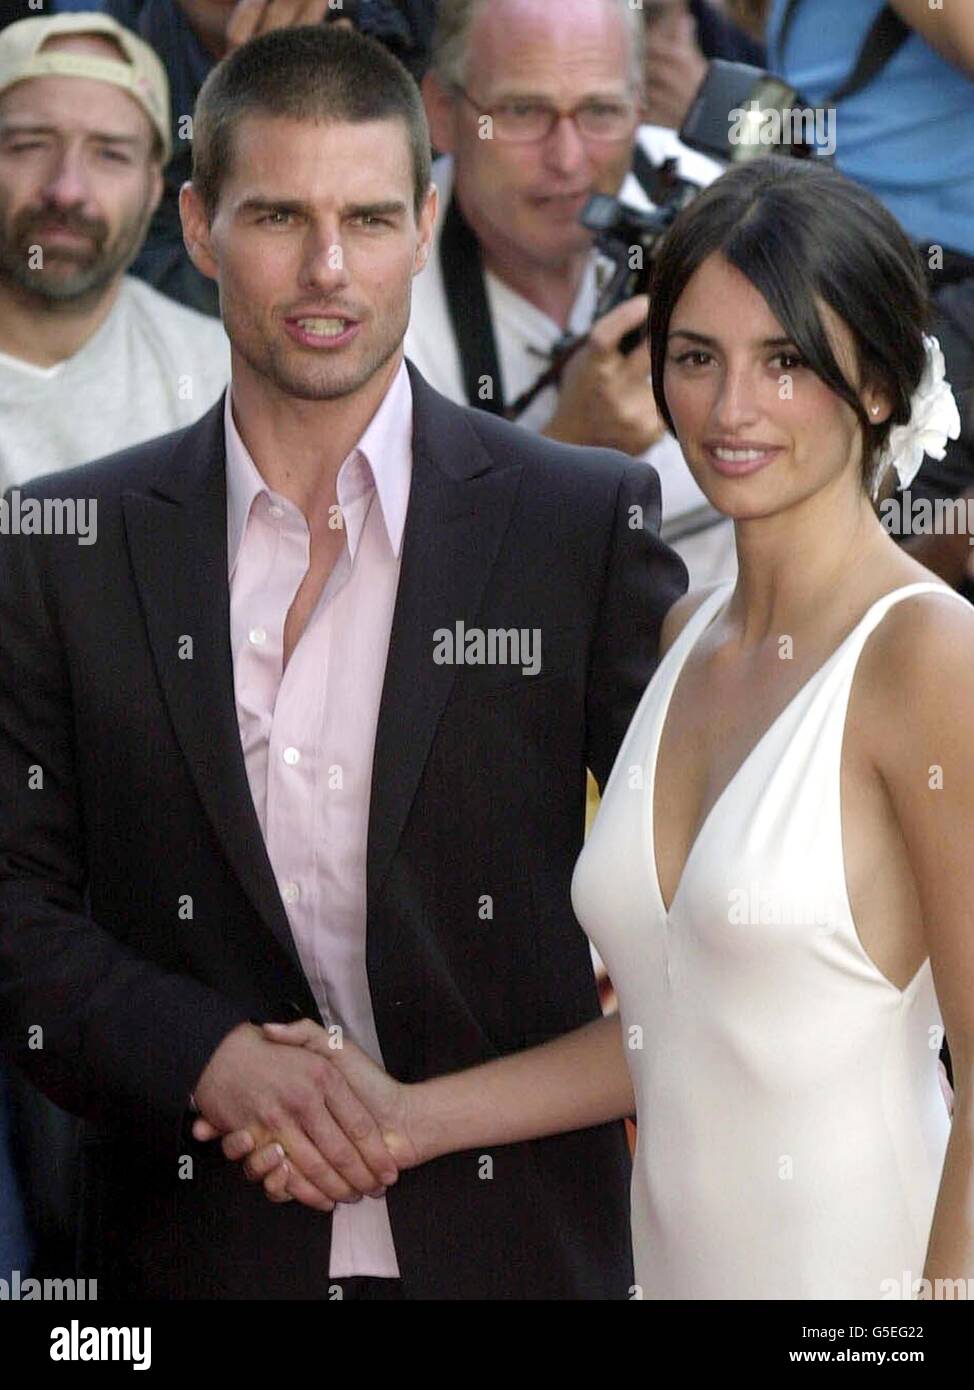 Spanish actress Penelope Cruz arrives with her boyfriend American actor Tom Cruise for the film premiere of her latest film Captain Corelli's Mandolin in Los Angeles, USA. This is the first time the couple have been photographed publicly. * 4/12/01: Spanish actress Penelope Cruz arriving with her boyfriend, American actor Tom Cruise, for the film premiere of Captain Corelli's Mandolin in Los Angeles, USA. Tom Cruise spoke for the first time of their new relationship, when the newly-divorced 39-year-old star compared Cruz to Hollywood legend Audrey Hepburn. He also defended his Scientology Stock Photo